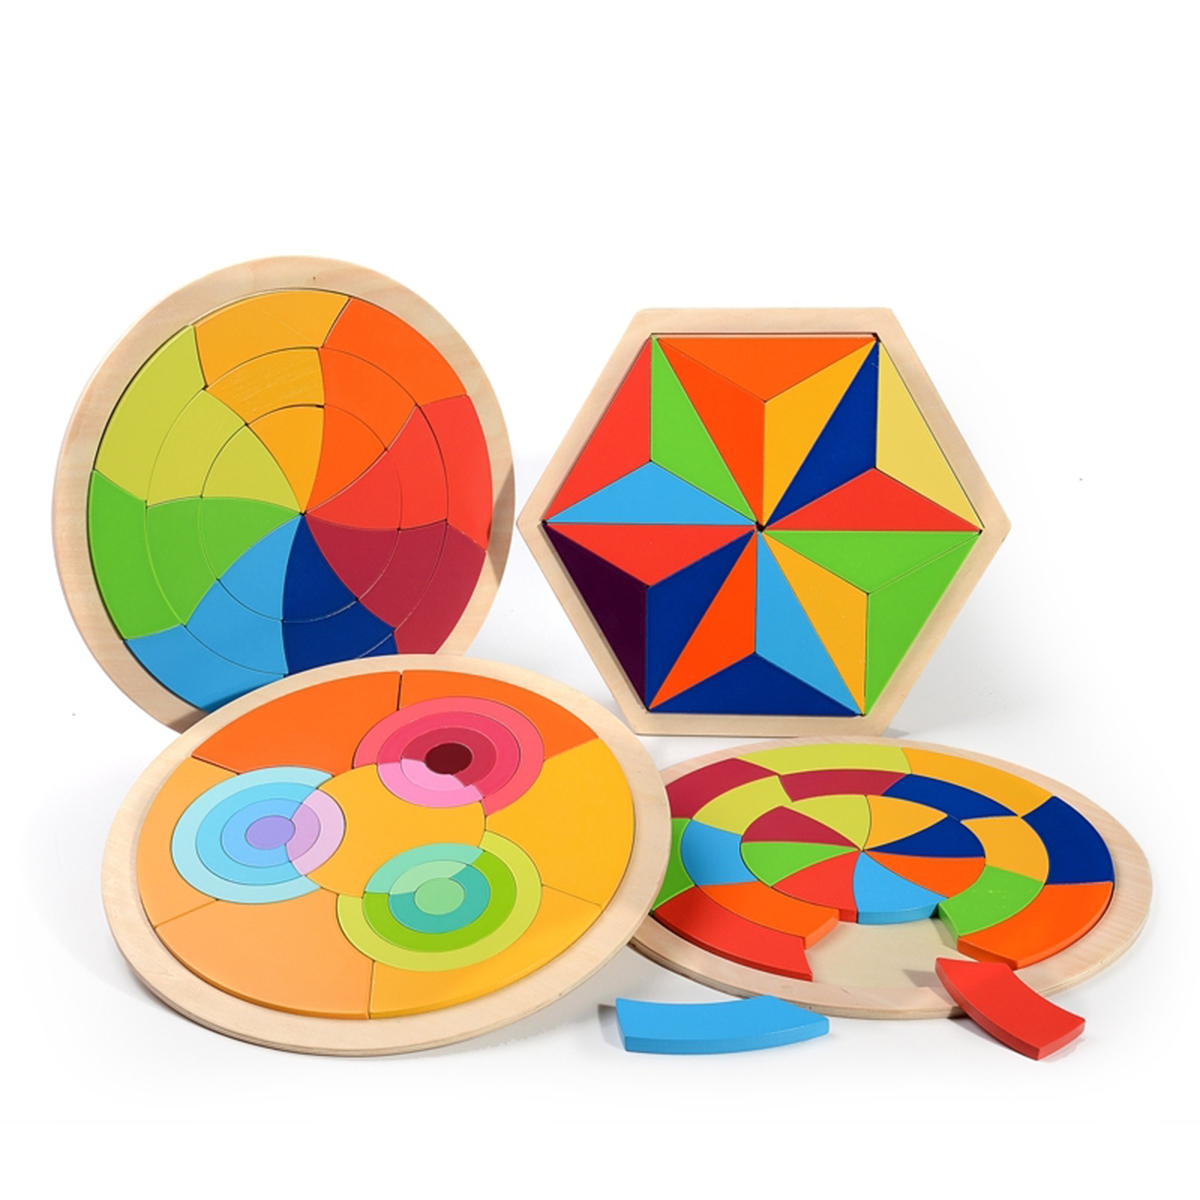 Colorful-Rainbow-Wooden-Blocks-Jigsaw-Puzzle-Toys-Kids-Learning-Educational-Game-1621515-8